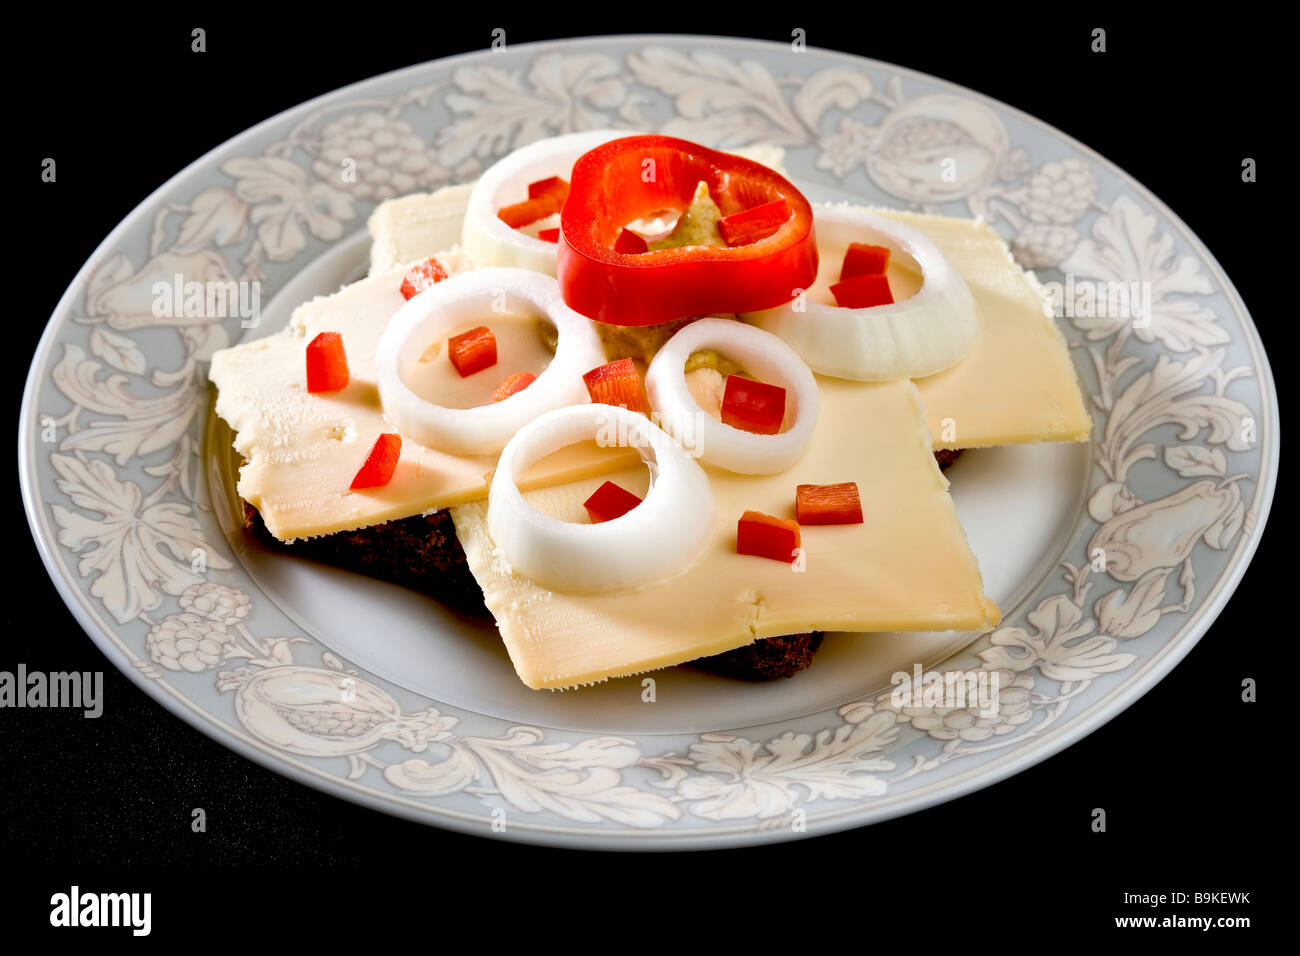 Cheese sandwich on a plate Stock Photo